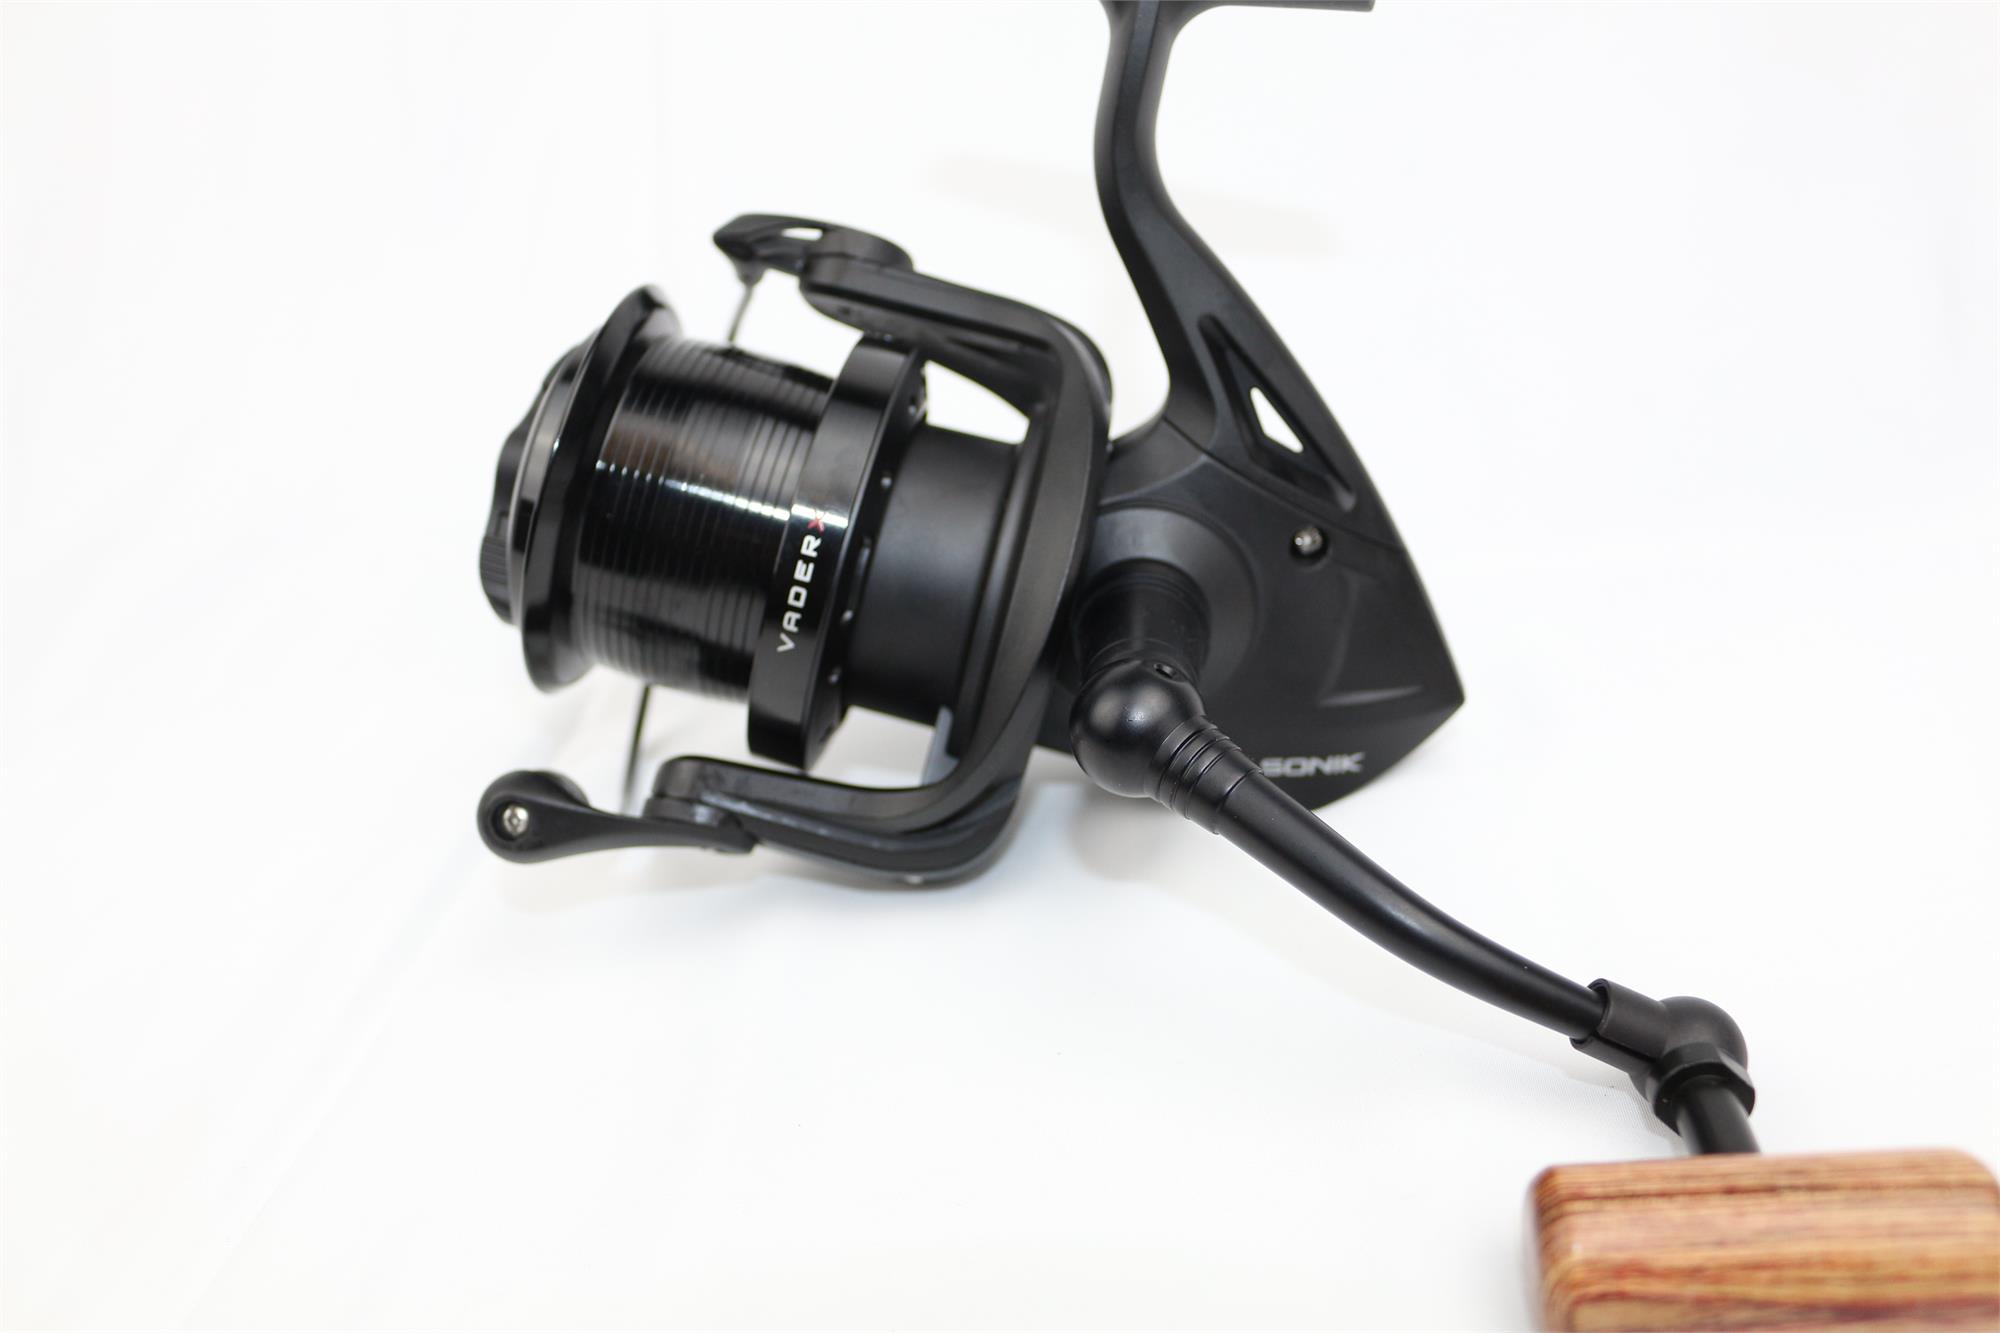 Sonik Vader X rod and reel review 